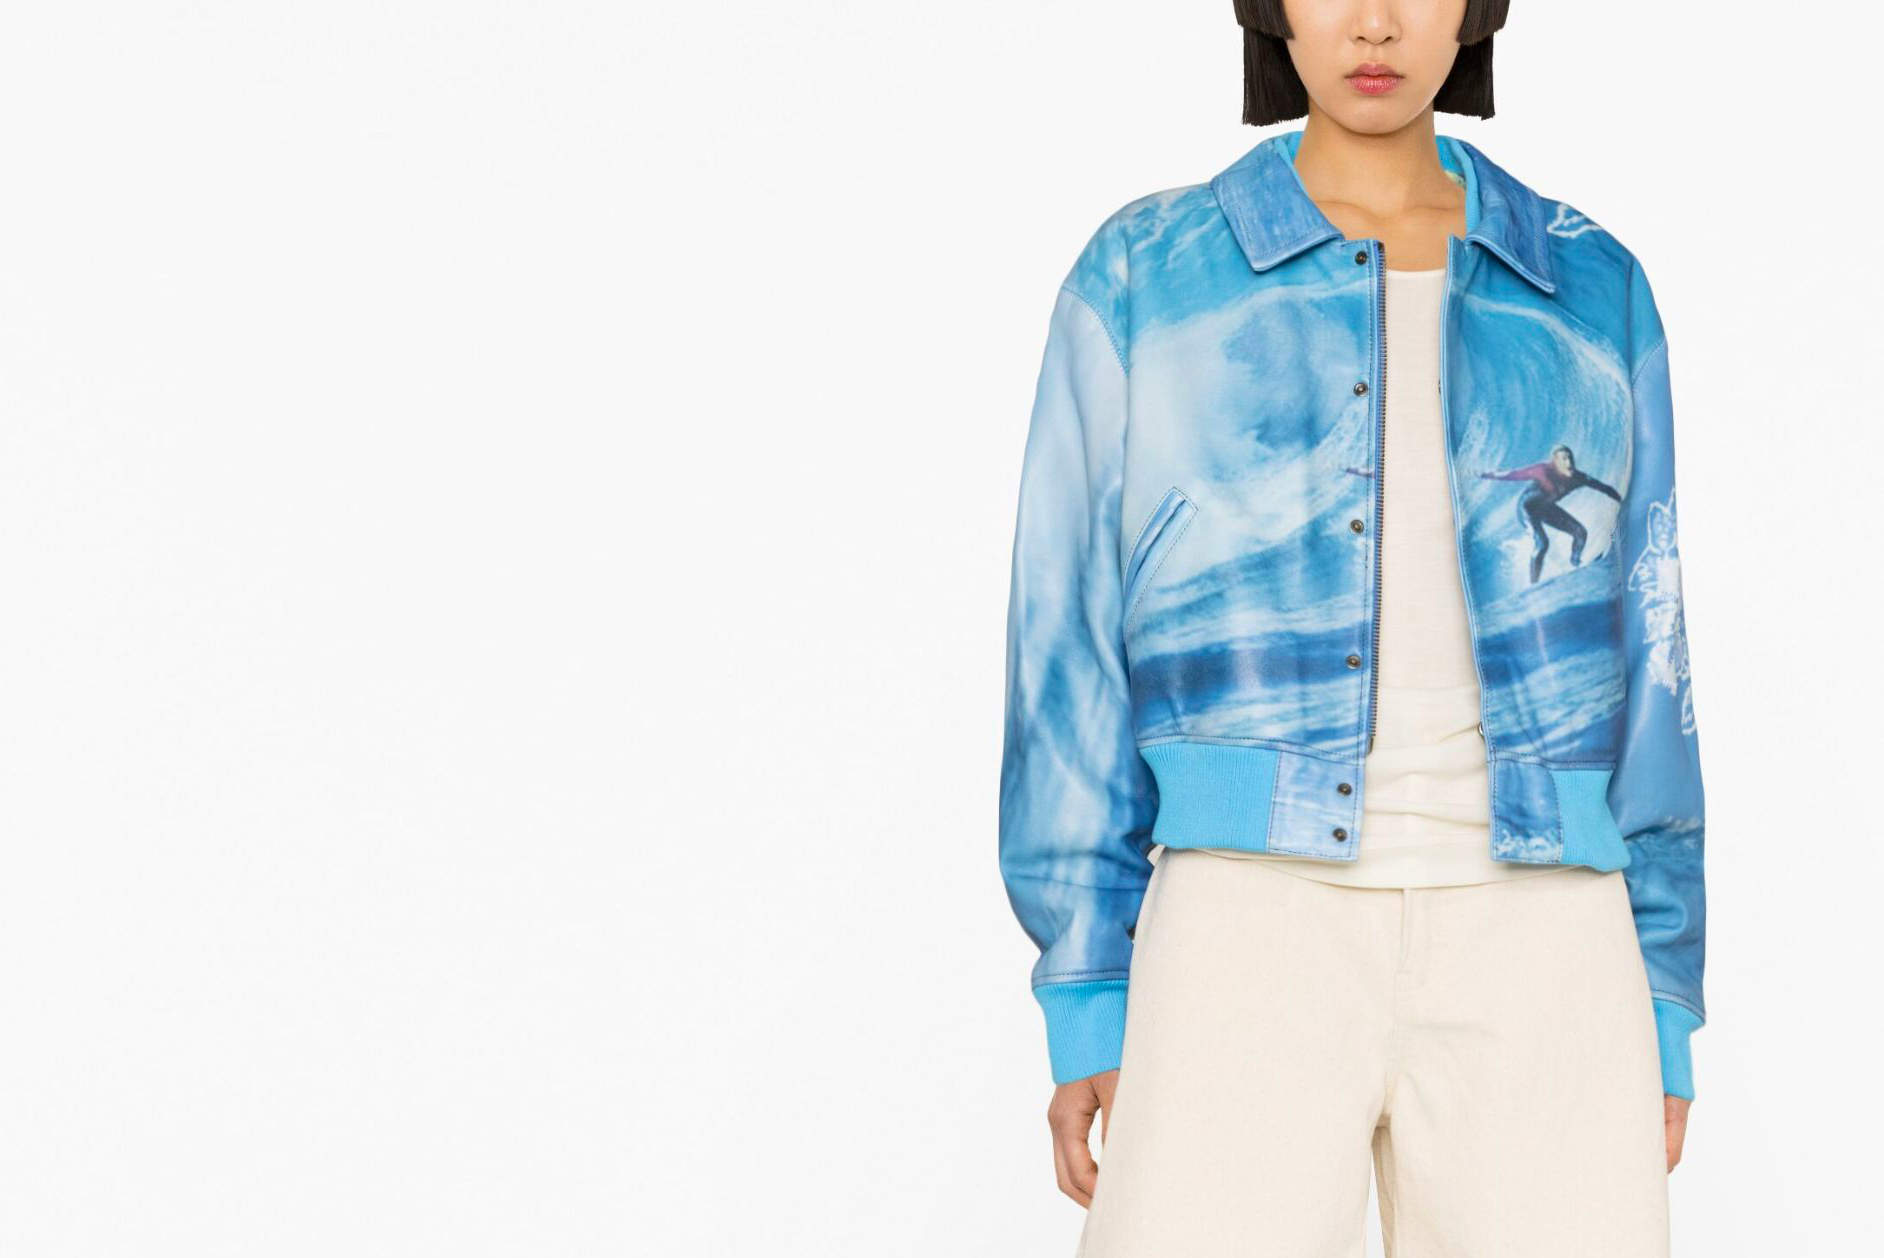 Shop the Surf-Inspired ERL Leather Jacket Here